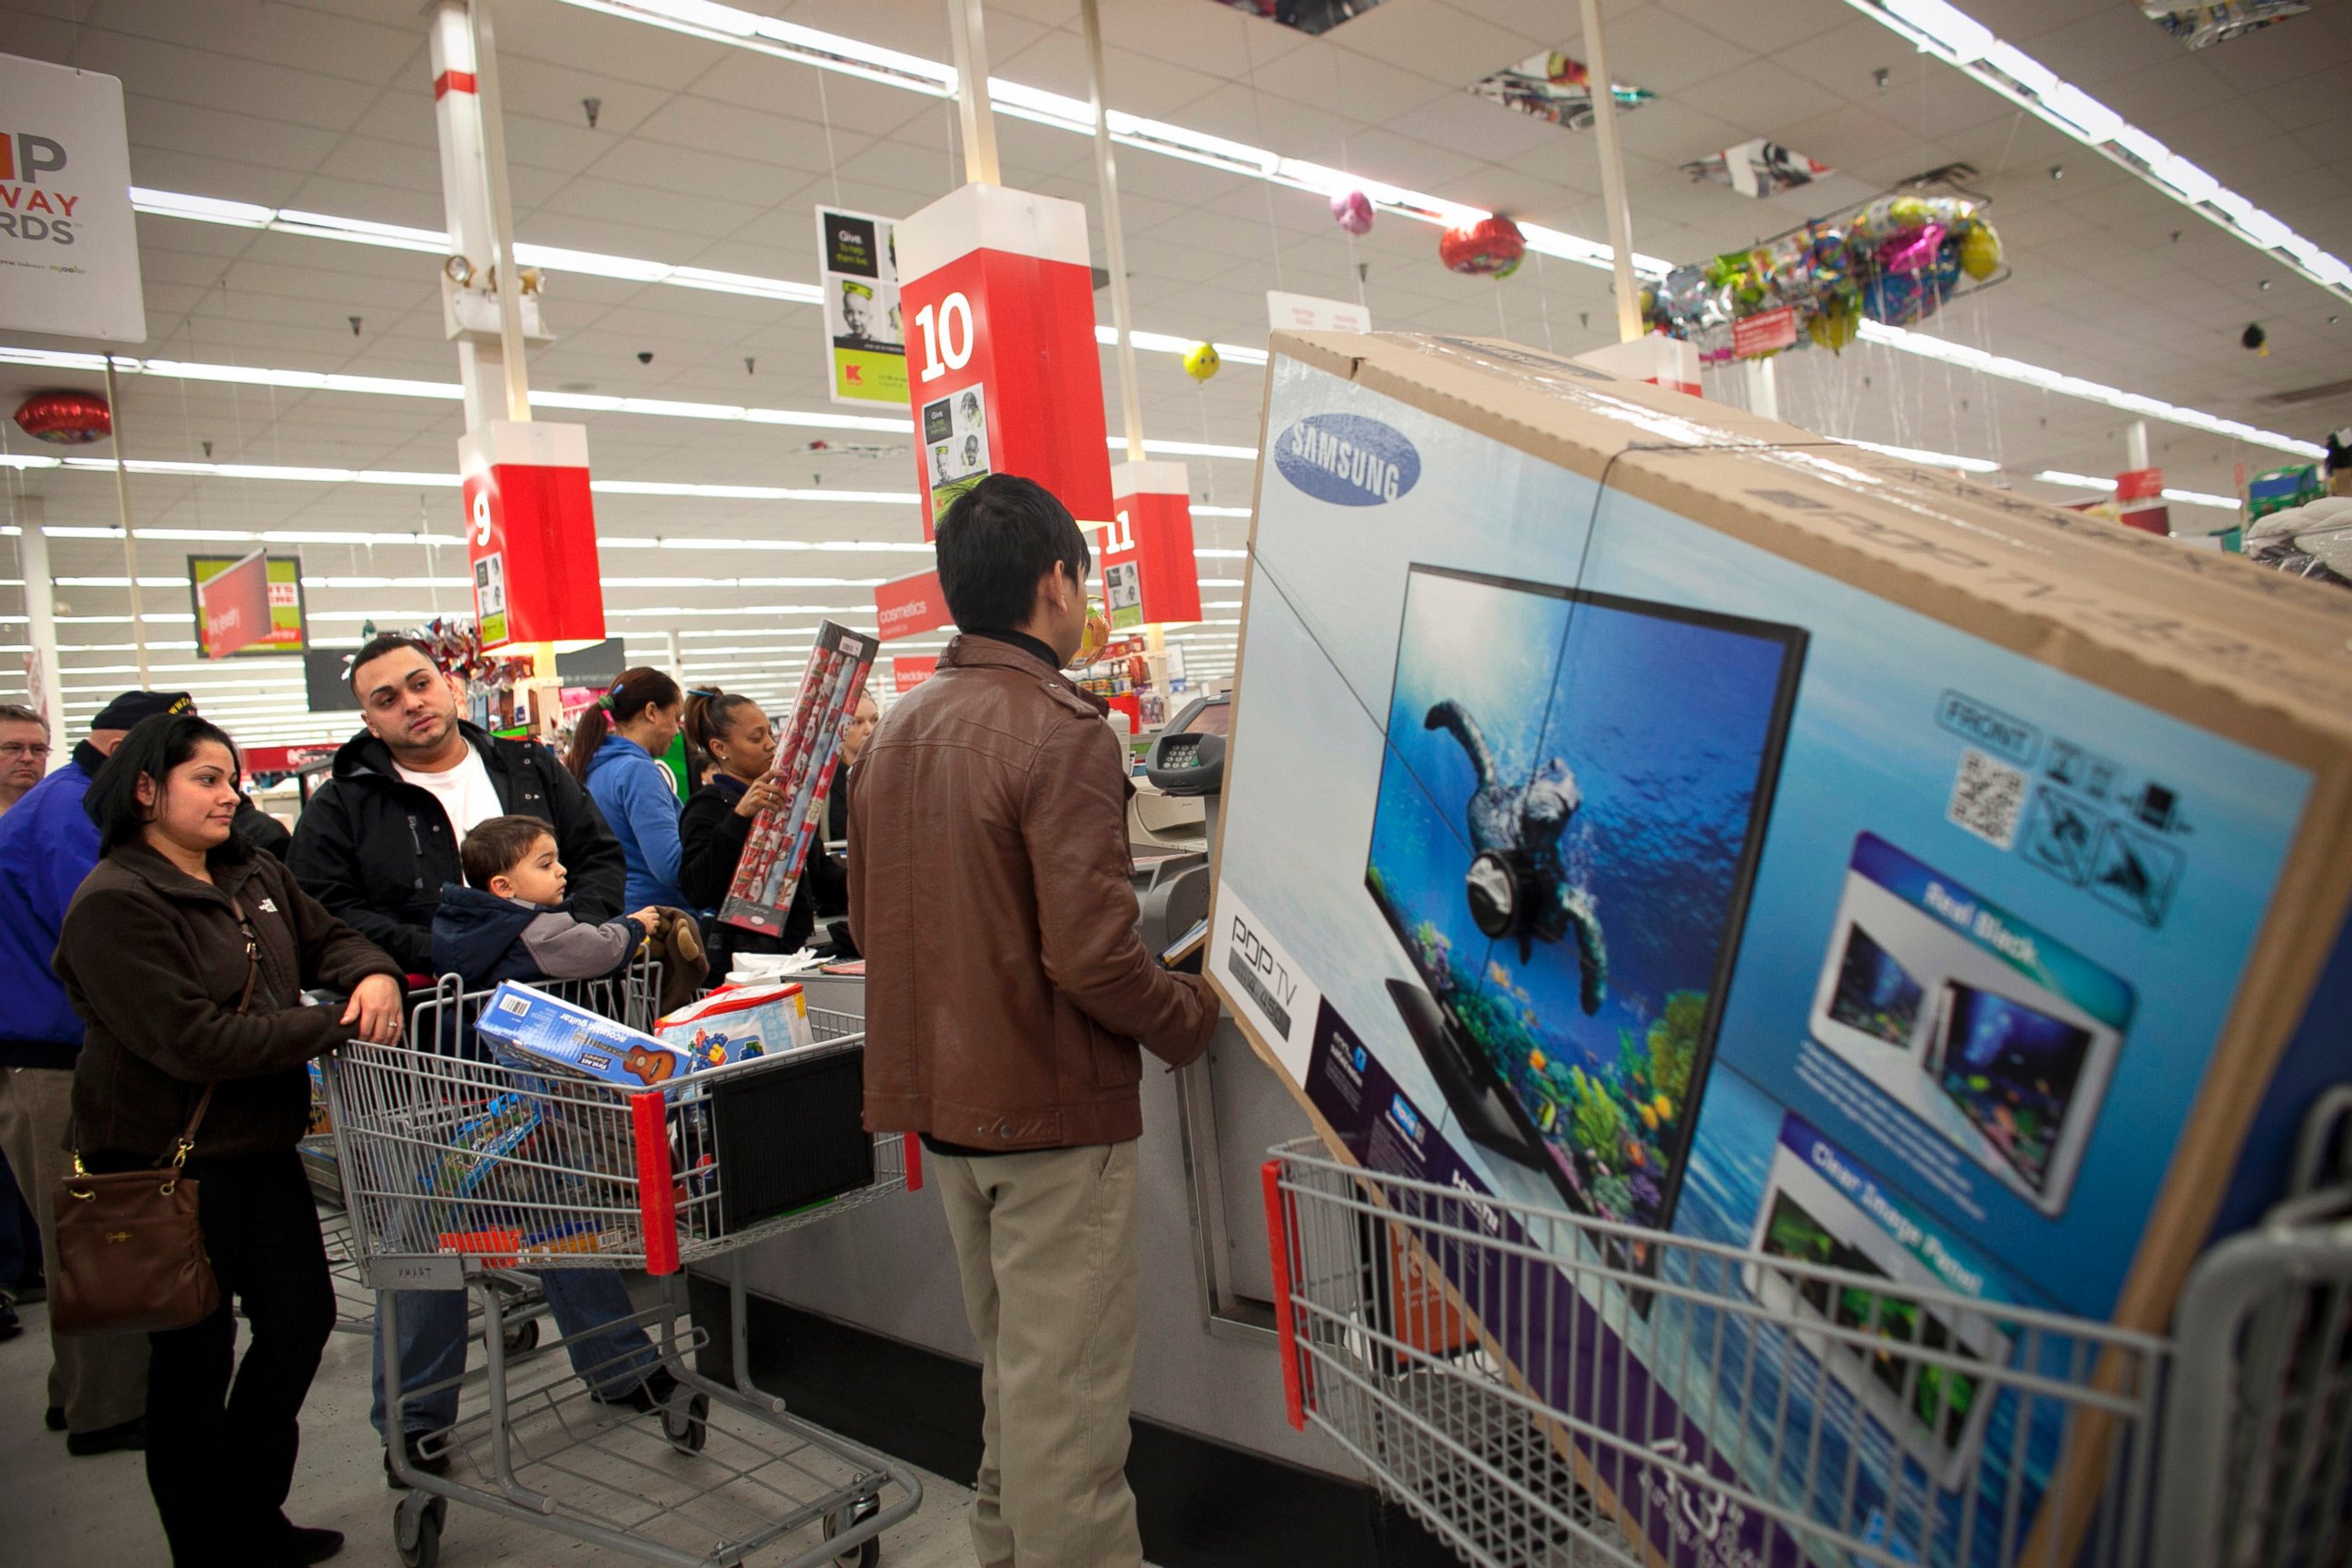 PHOTO: Shoppers wait in a check out line at a Kmart store during the Black Friday sales, Nov. 23, 2012, in Braintree, Mass.